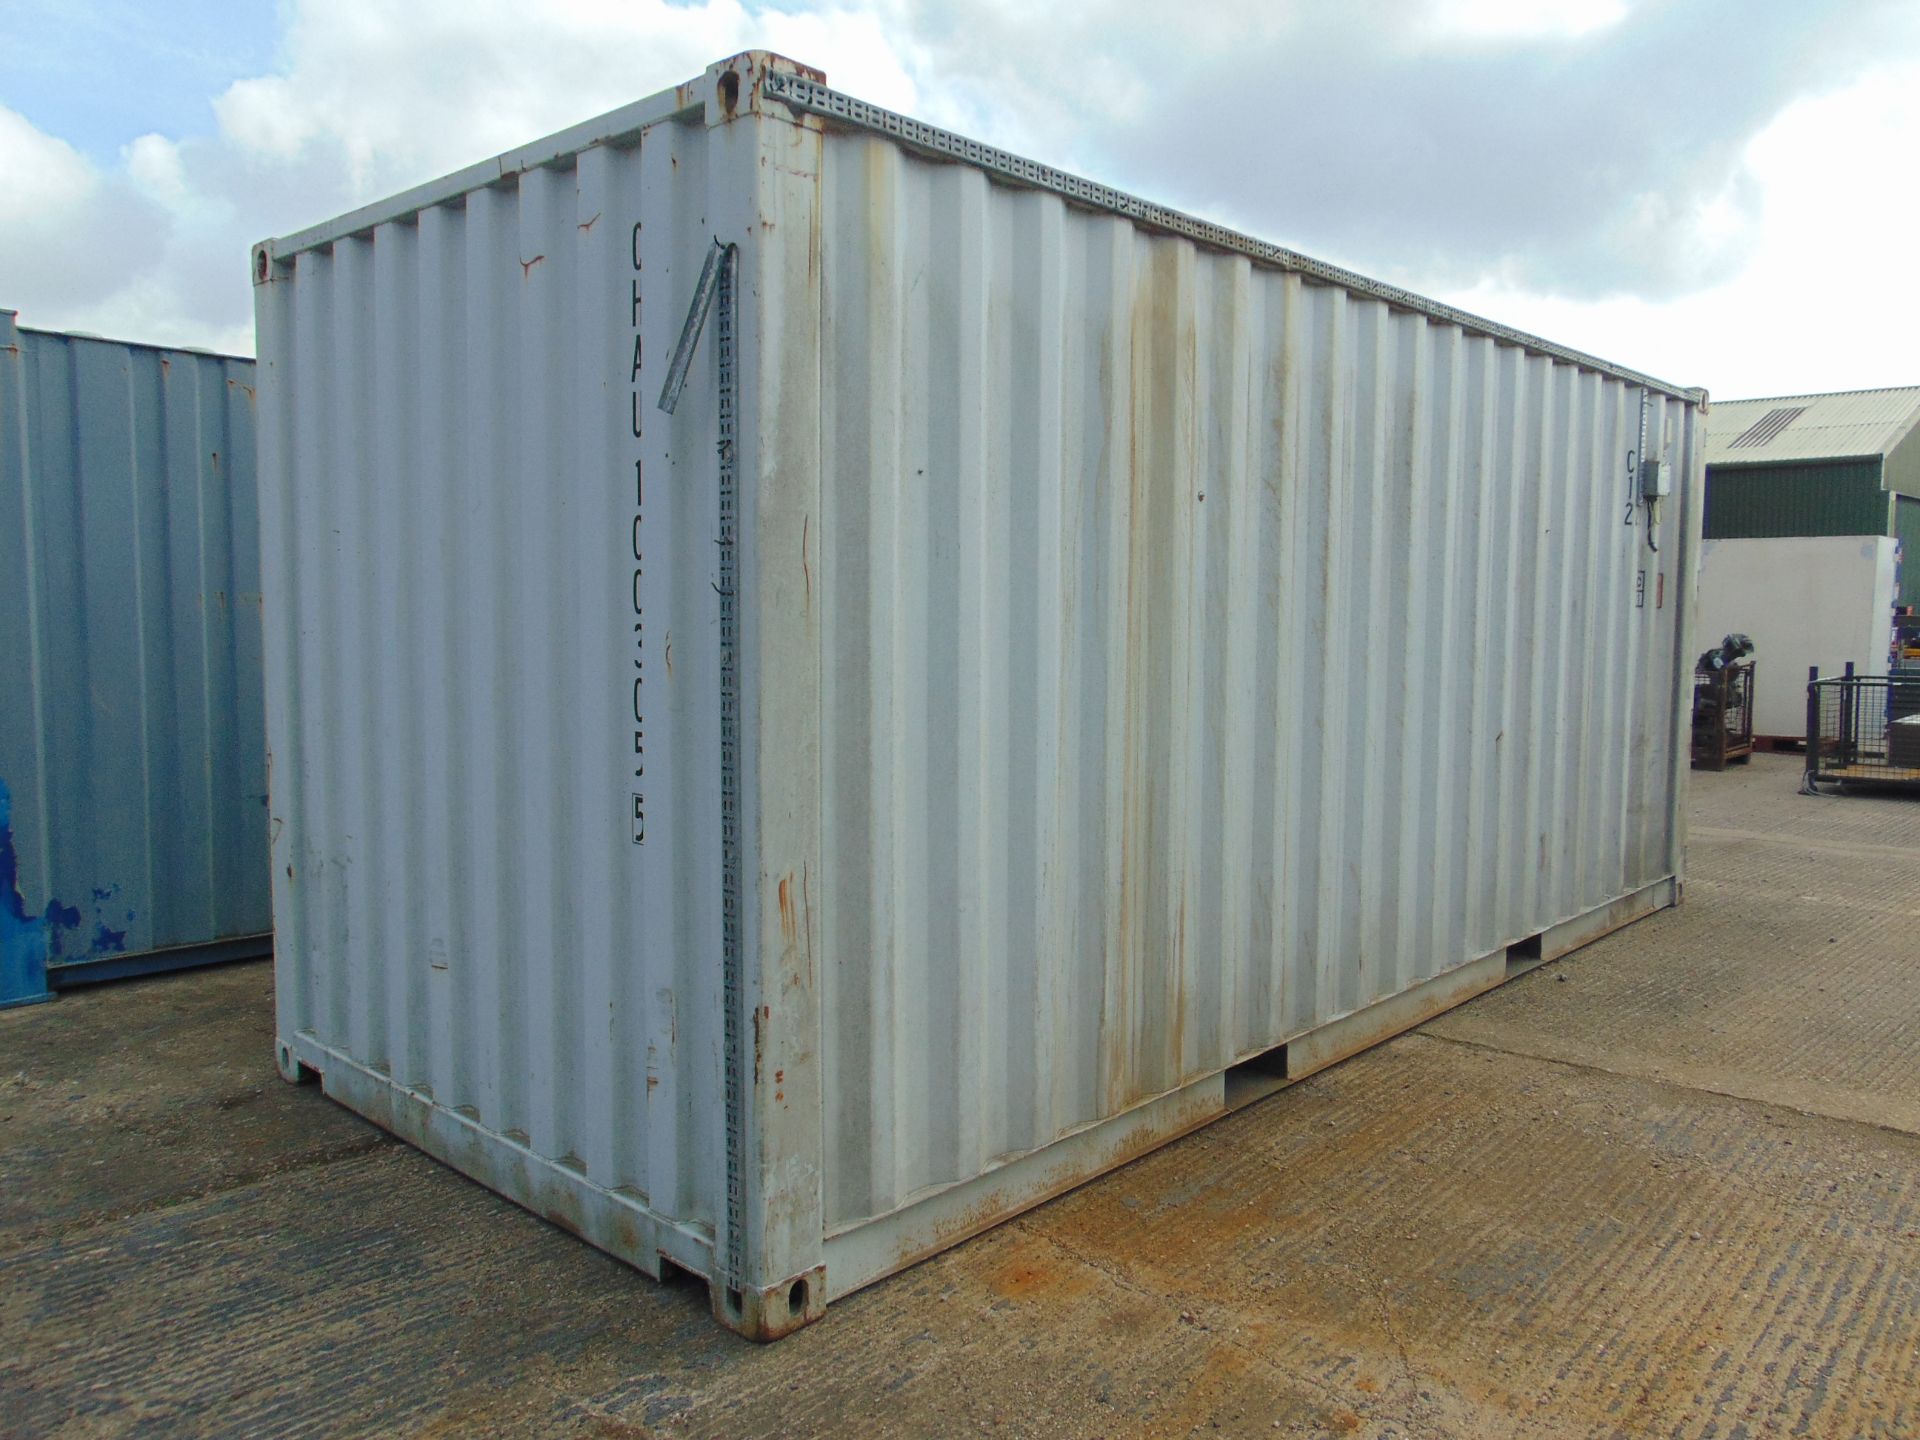 Secure Storage 20ft Shipping Container C/W Electrics, Lights, Forklift Pockets etc - Image 5 of 16